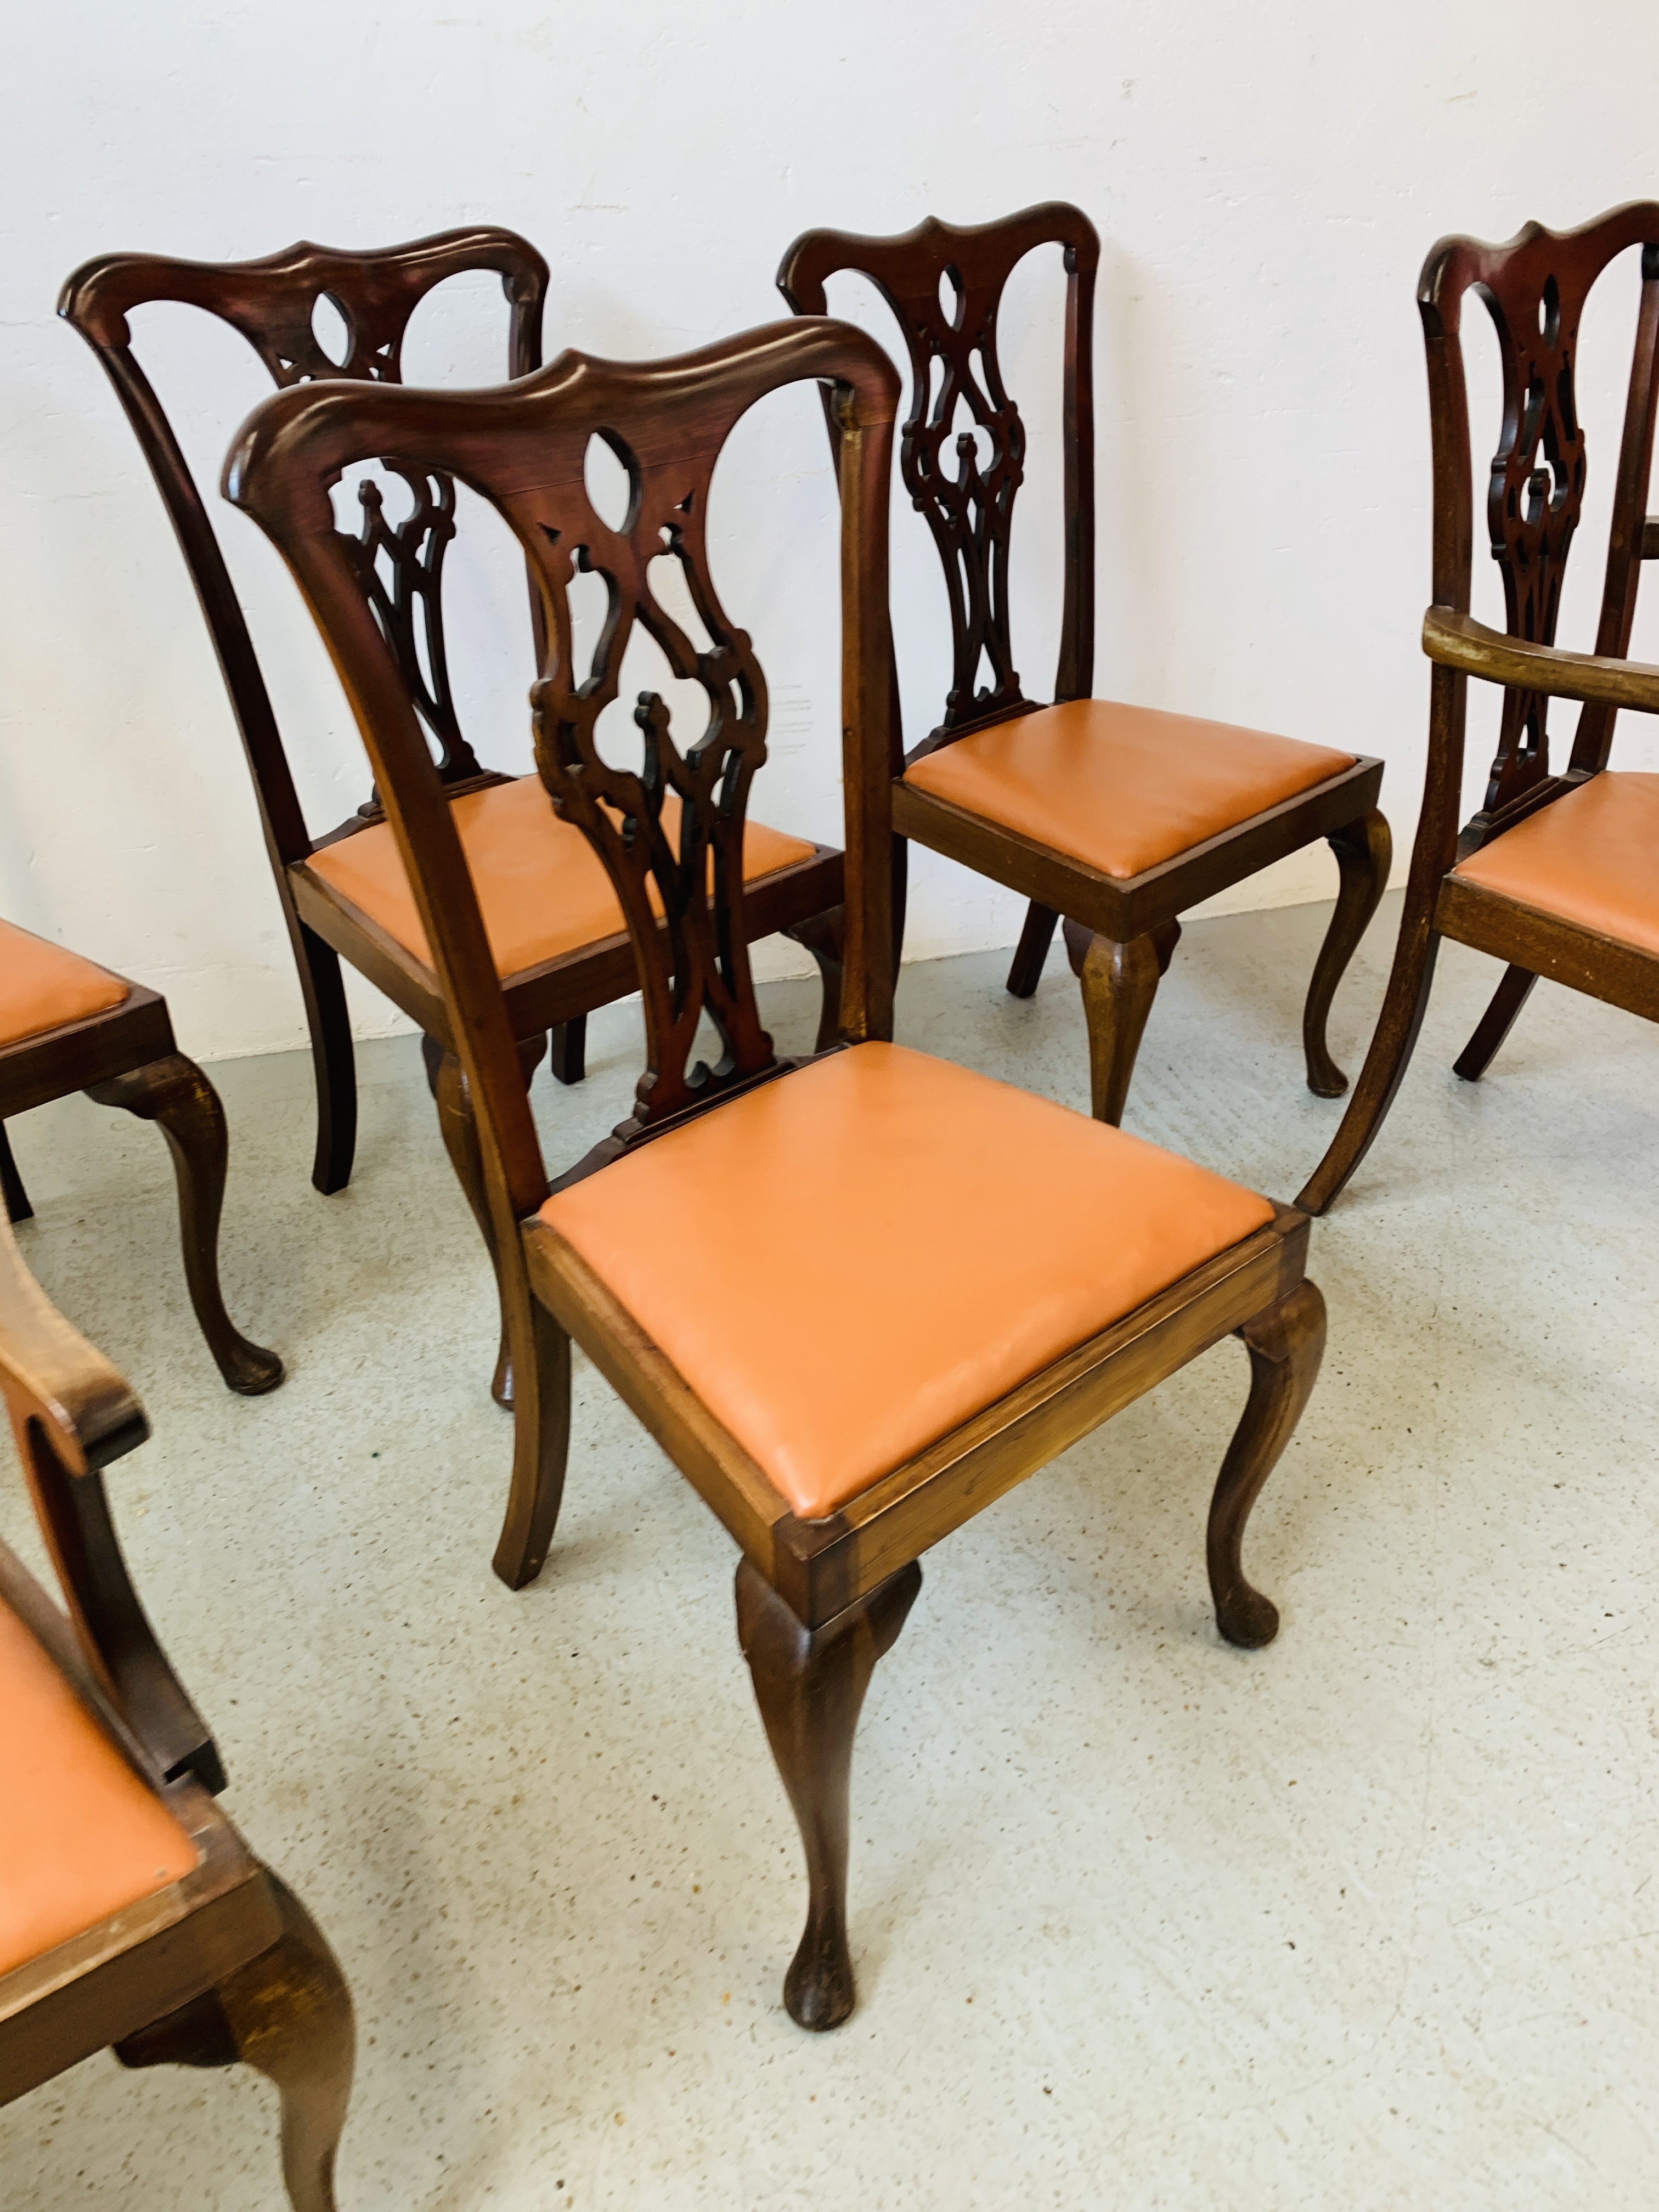 SET OF 6 MAHOGANY DINING CHAIRS (4 SIDE, 2 CARVER) WITH LEATHERETTE DROP IN SEATS, QUEEN ANN LEG, - Image 4 of 8